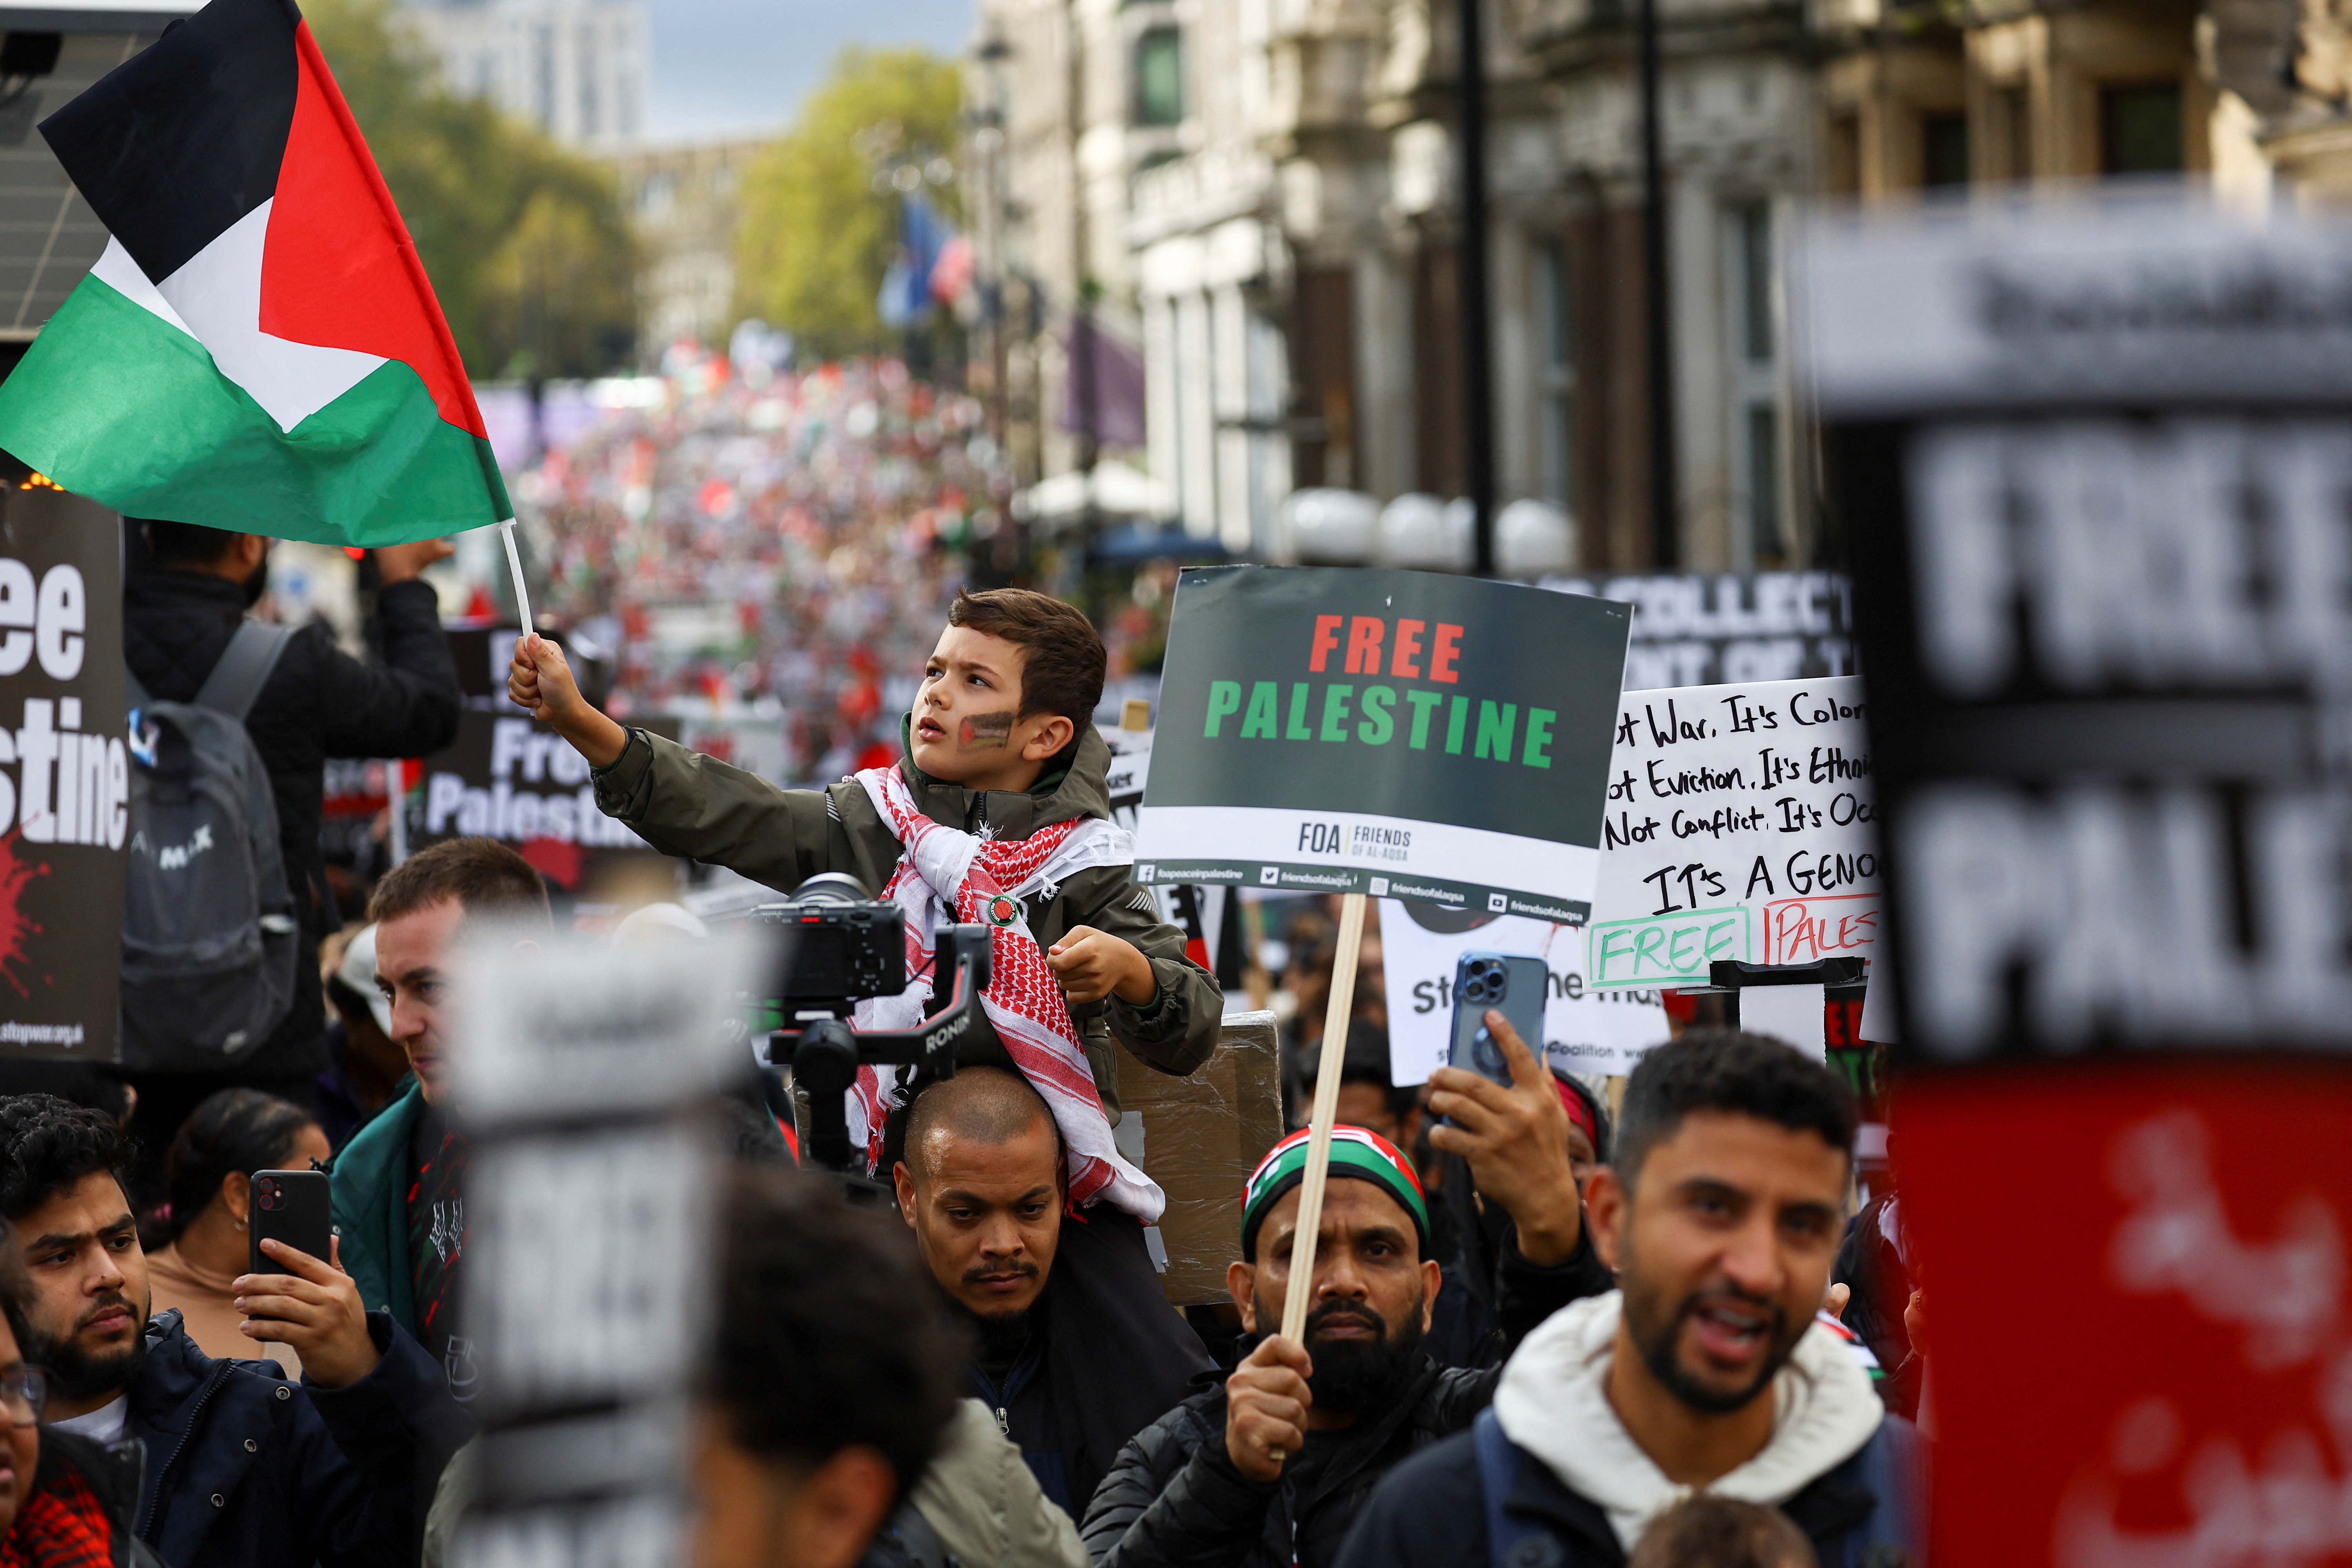 Demonstrators protest in solidarity with Palestinians in Gaza, in London